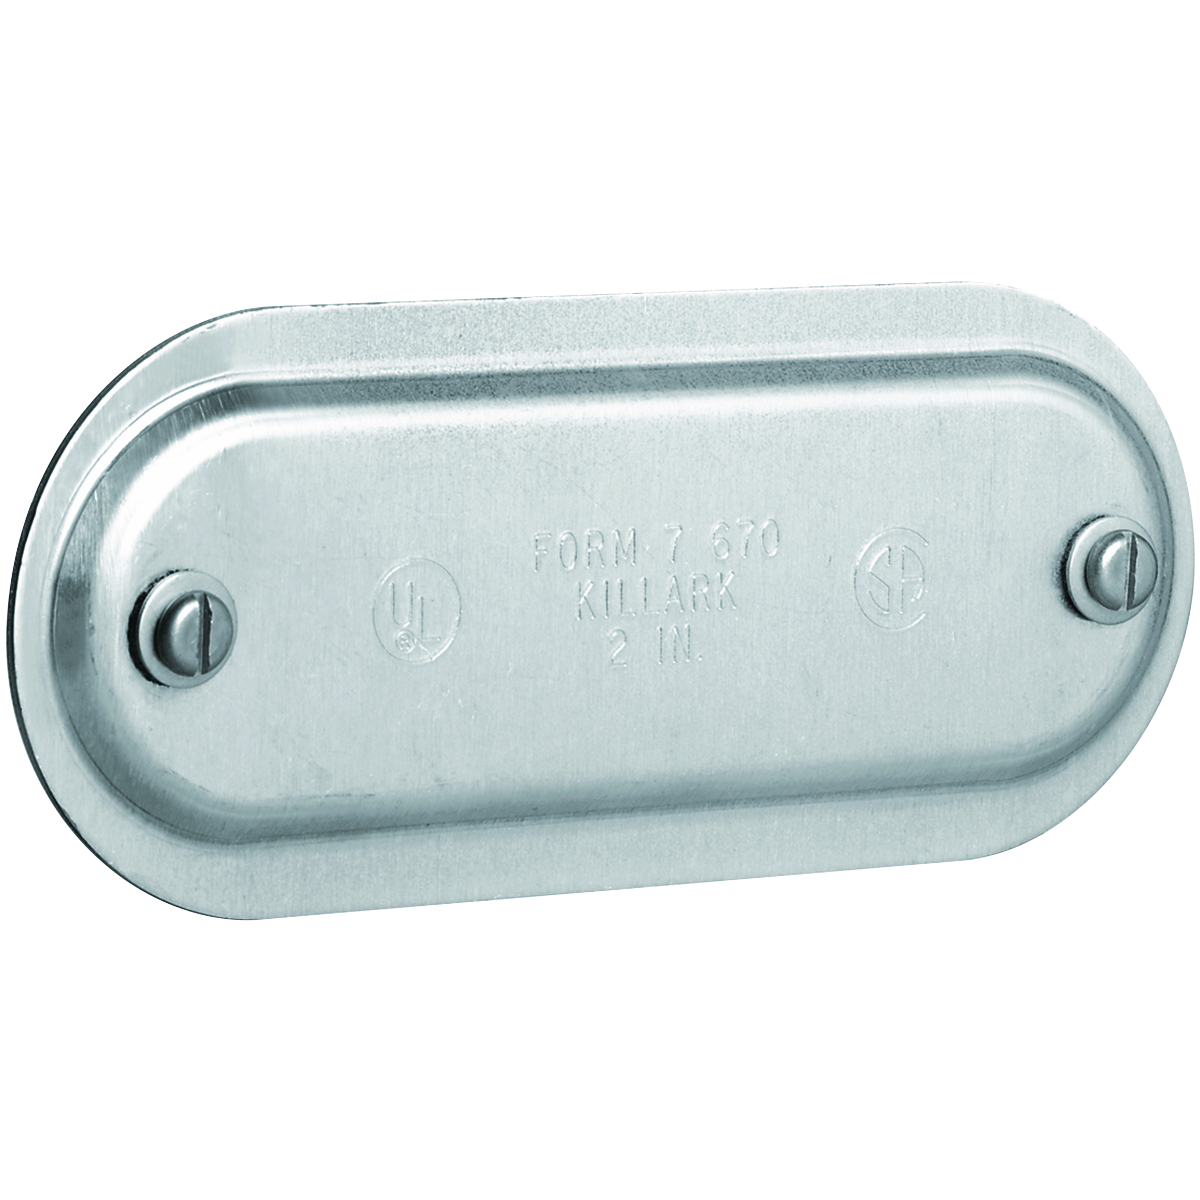 DURALOY 7 SERIES - STAMPED STEEL CONDUIT BODY COVER - HUB SIZE 3/4 INCH